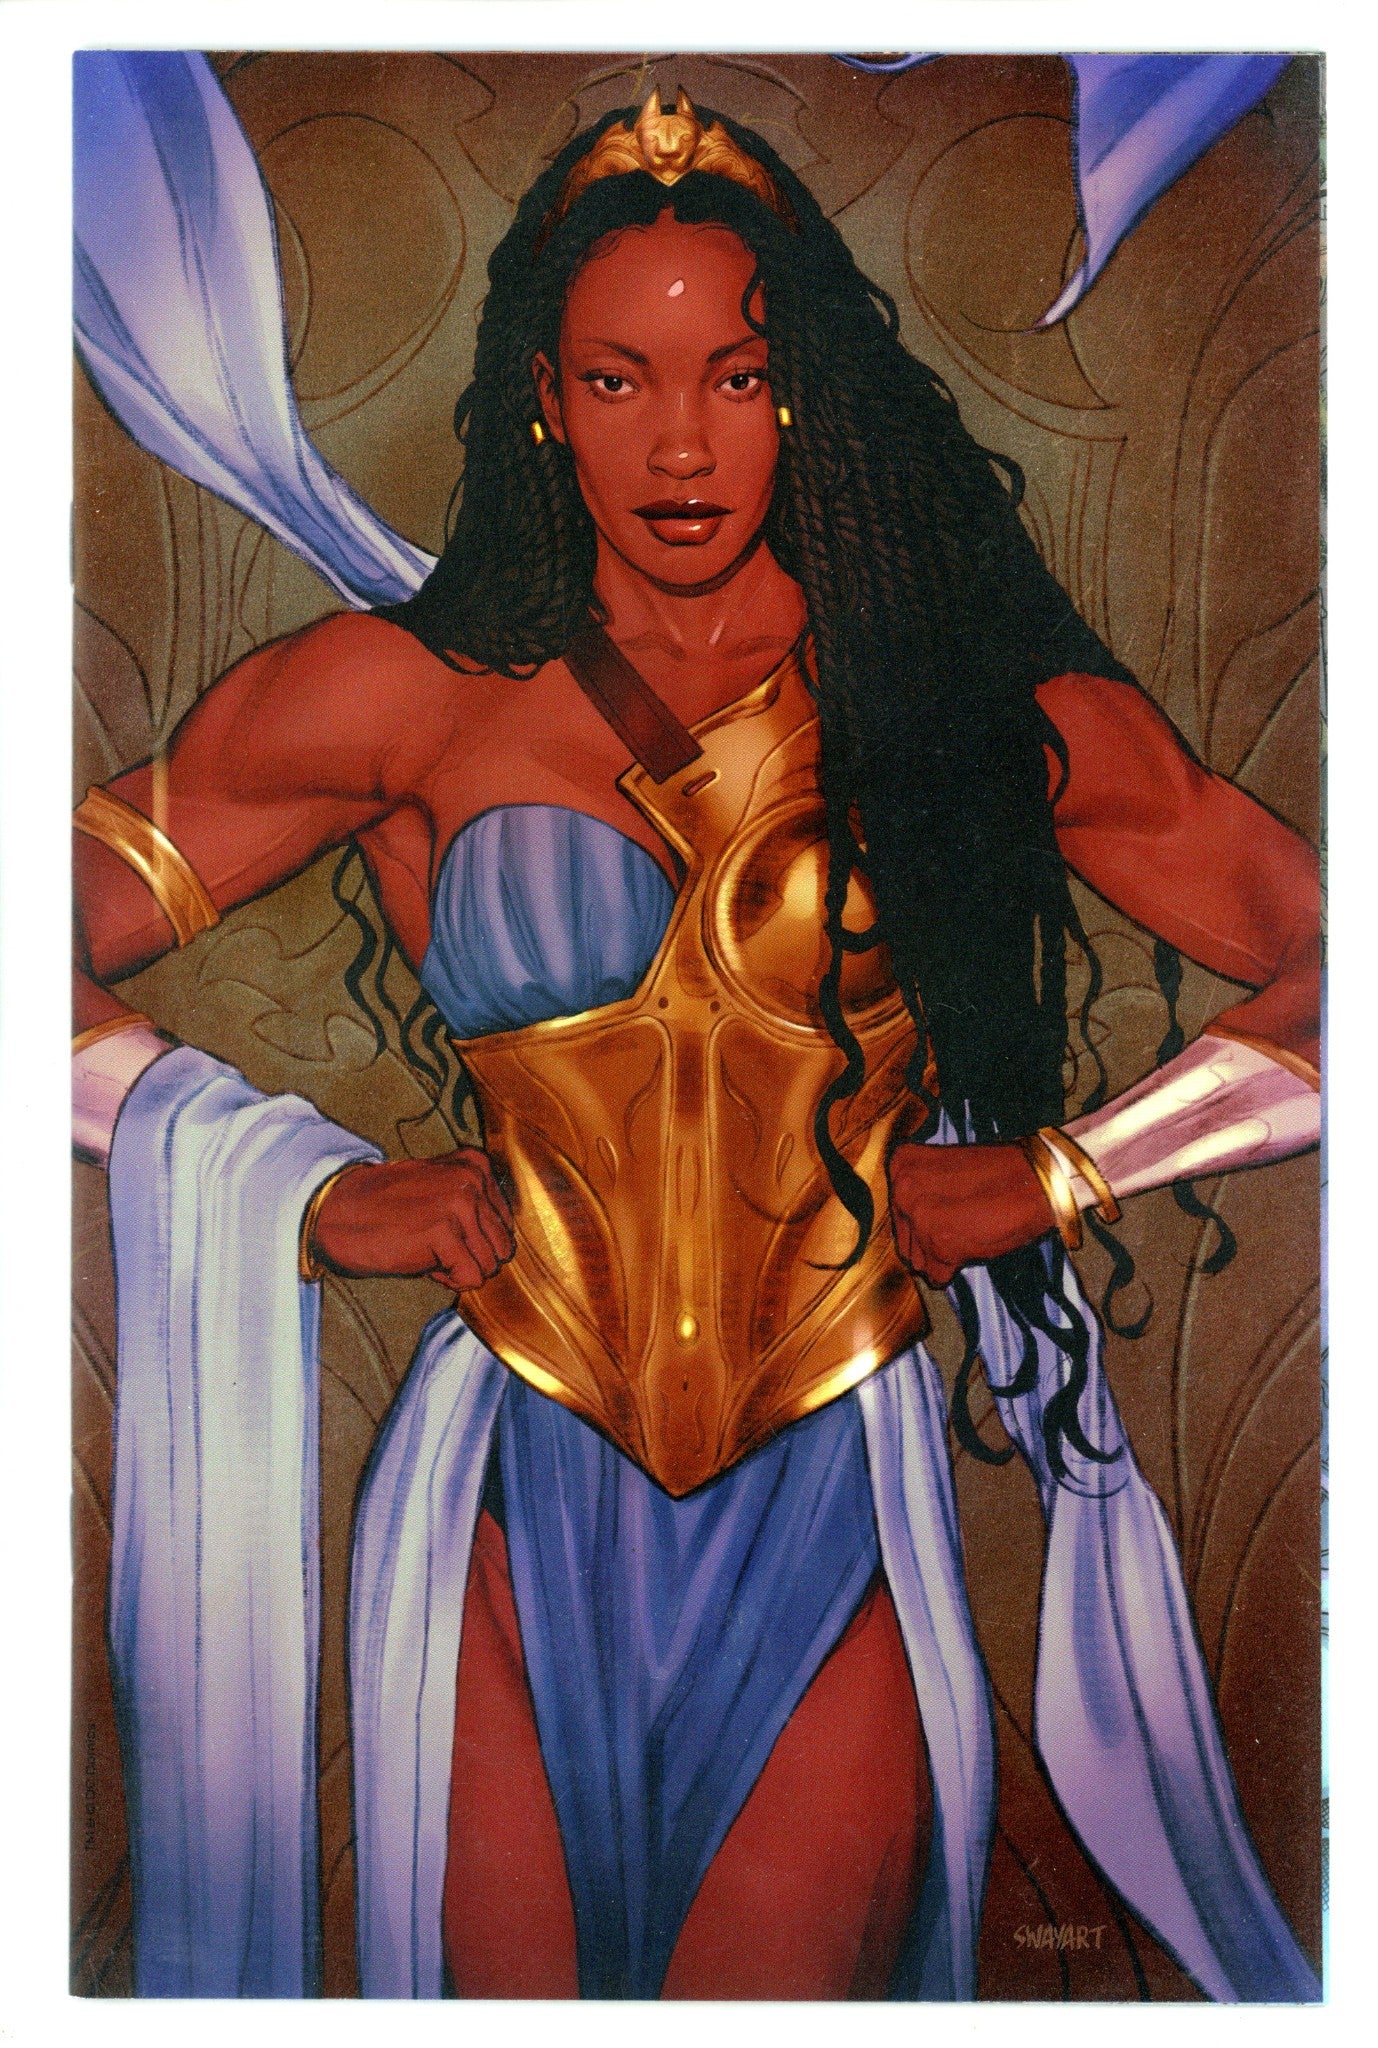 Nubia & the Amazons Vol 5 1 NM (9.4) (2021) Swaby Foil Variant 